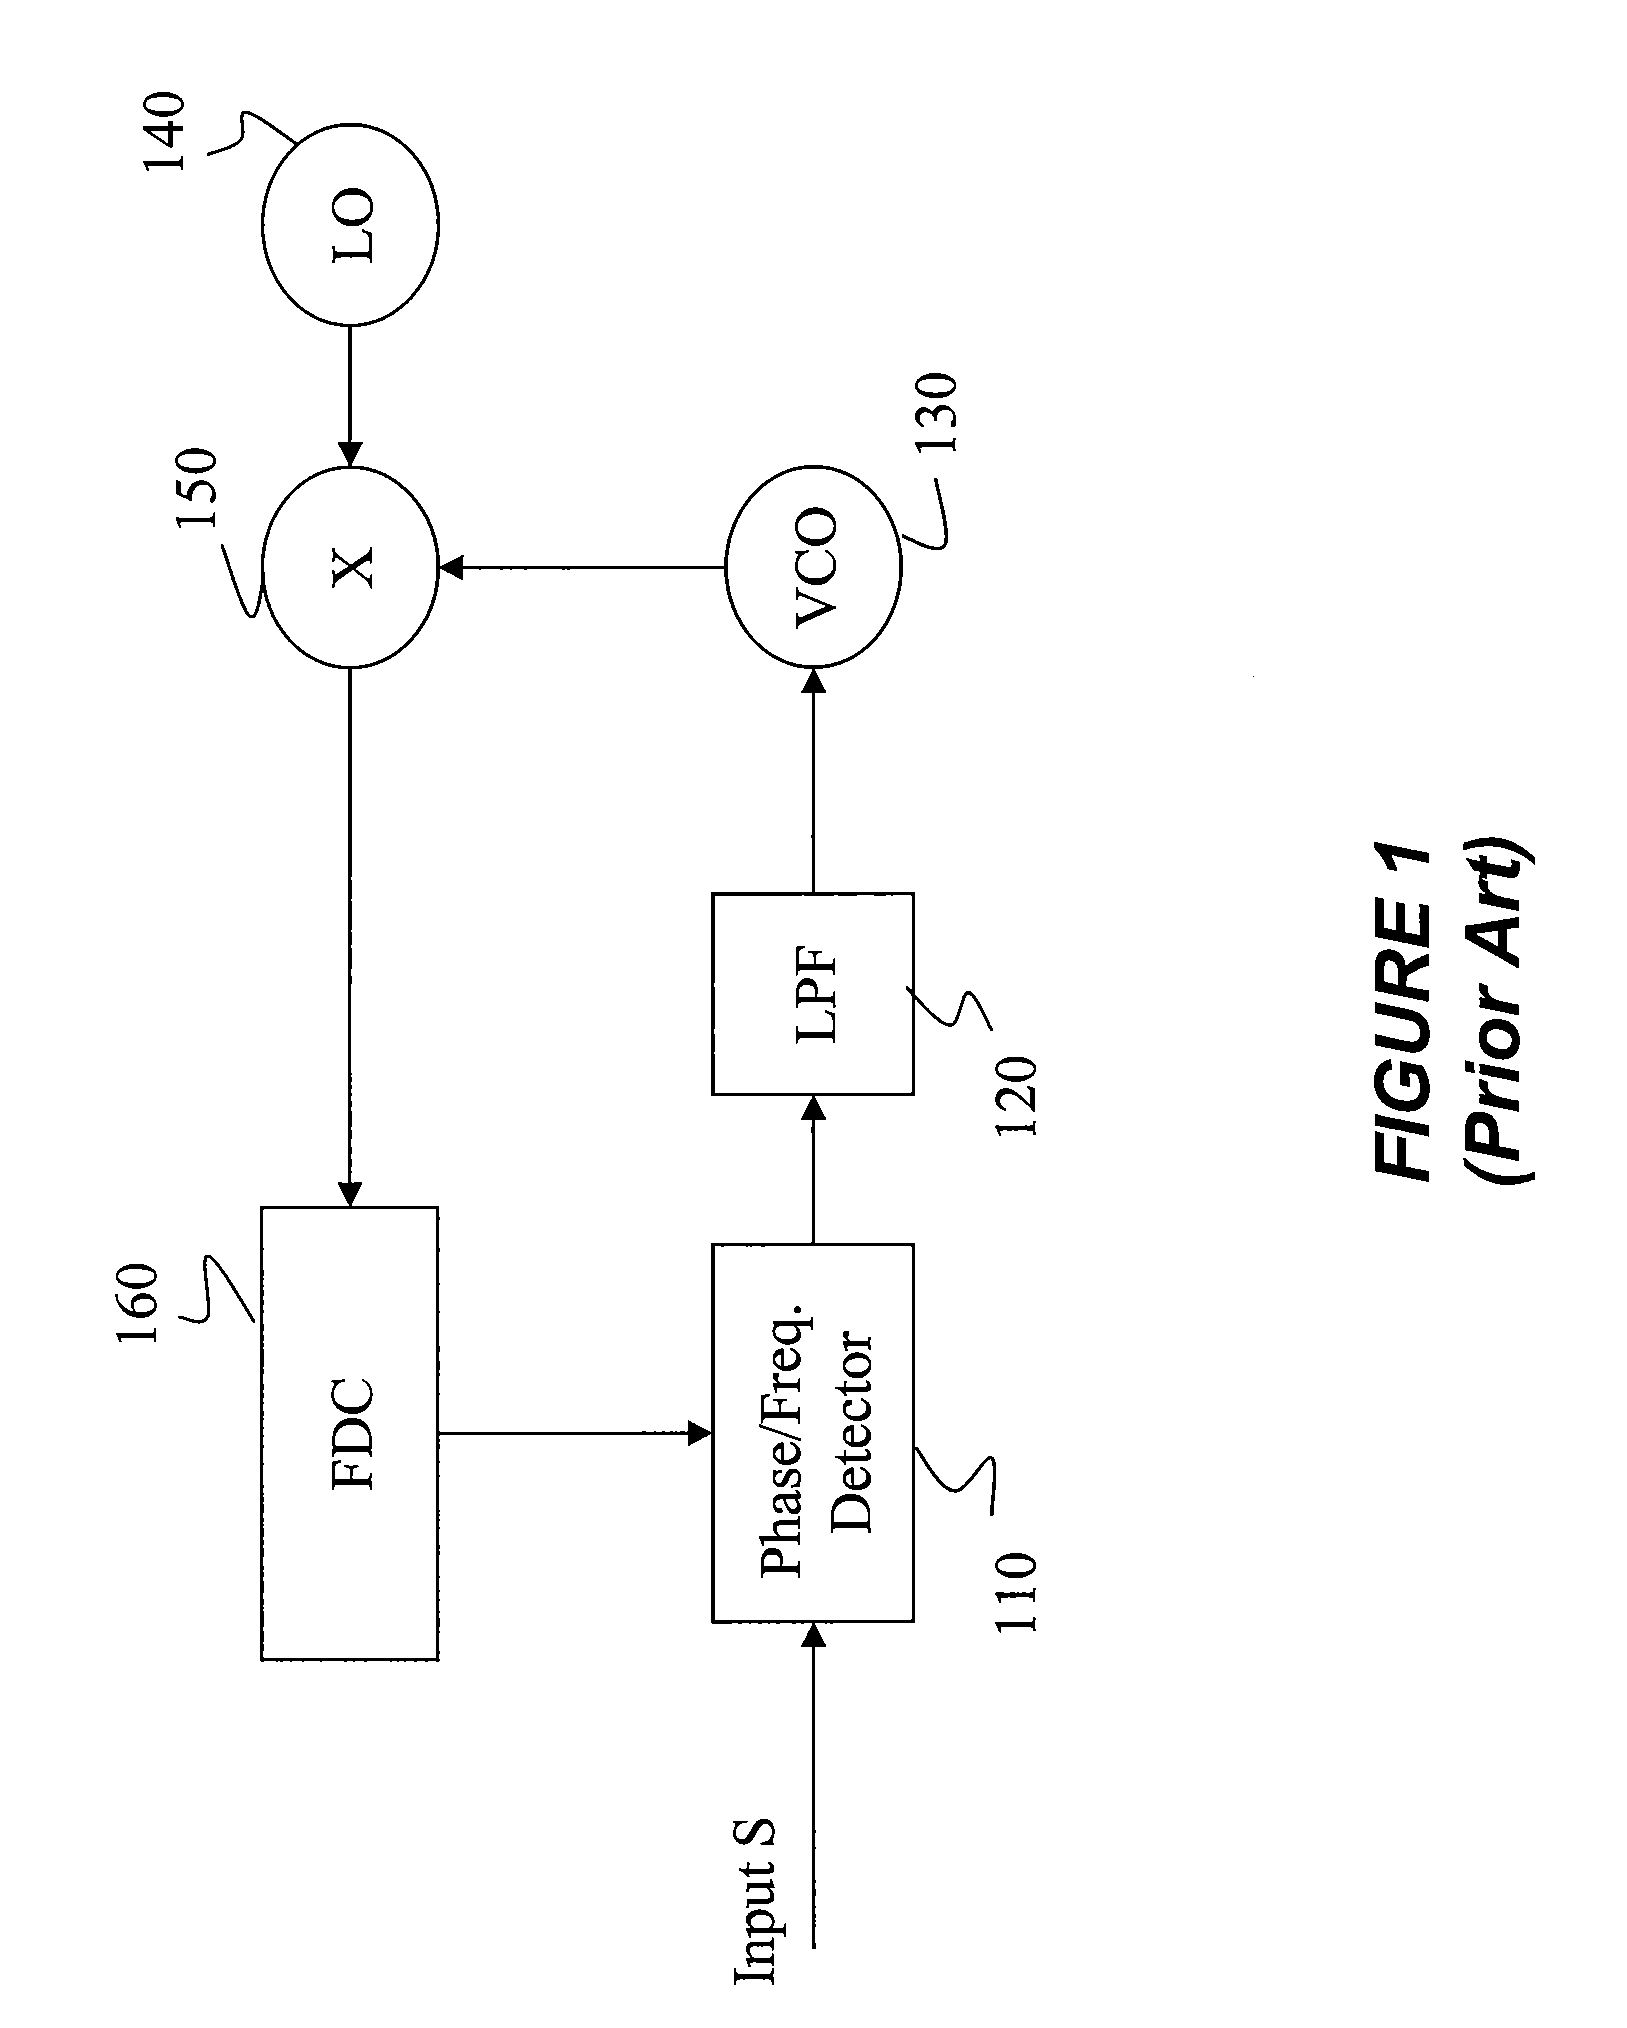 Multiphase direct RF frequency to digital converter and related method